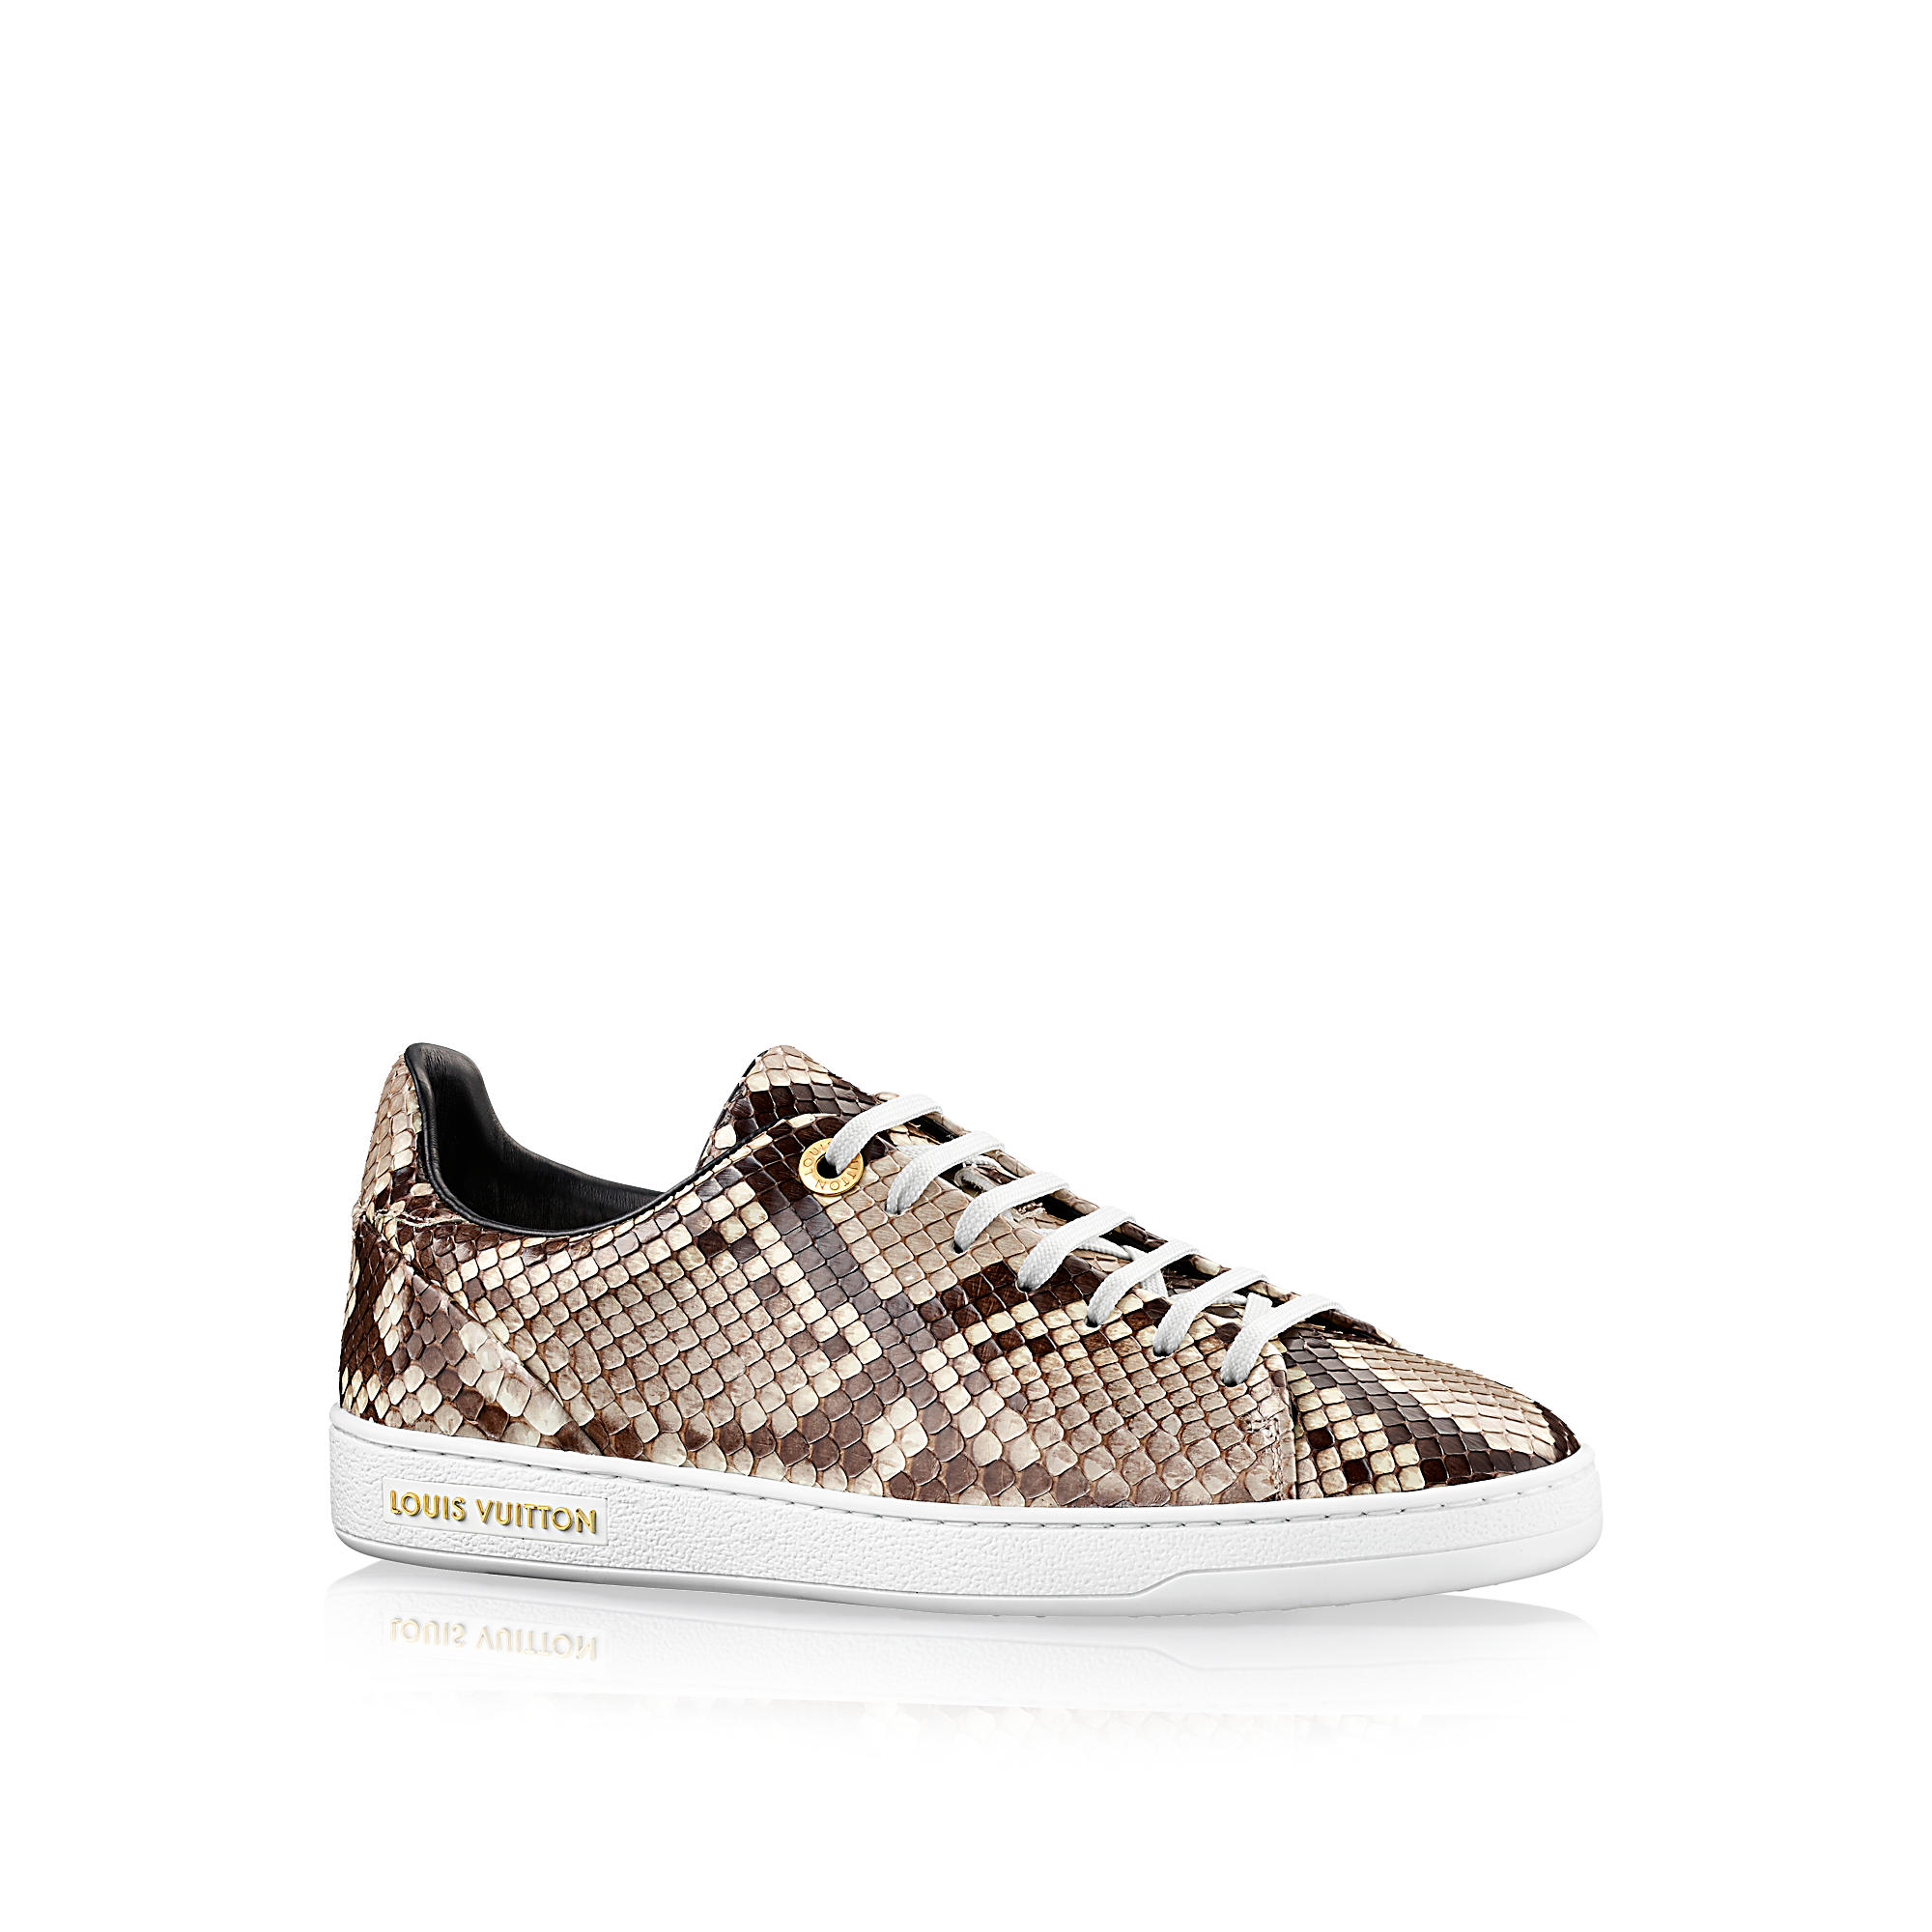 Louis Vuitton, Shoes, Louis Vuitton Frontrow Sneaker One Time Super Low  Price Drop Now Dont Miss Out